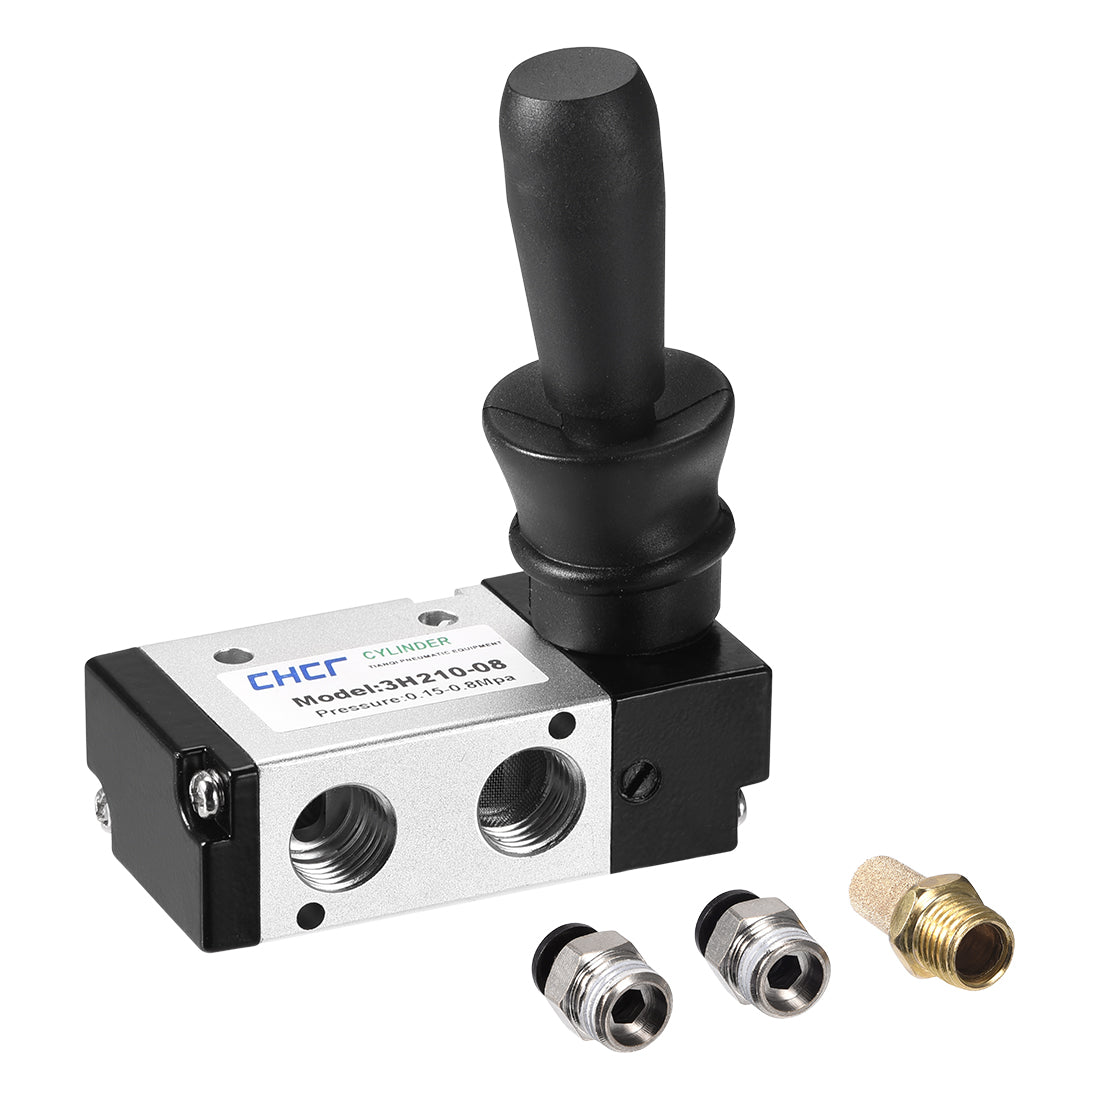 uxcell Uxcell Manual Hand Pull Solenoid Valve 2 Position 3 Way Pneumatic 1/4" PT Air Hand Lever Operated Valve with 6mm OD Connect Fitting Exhaust Muffler